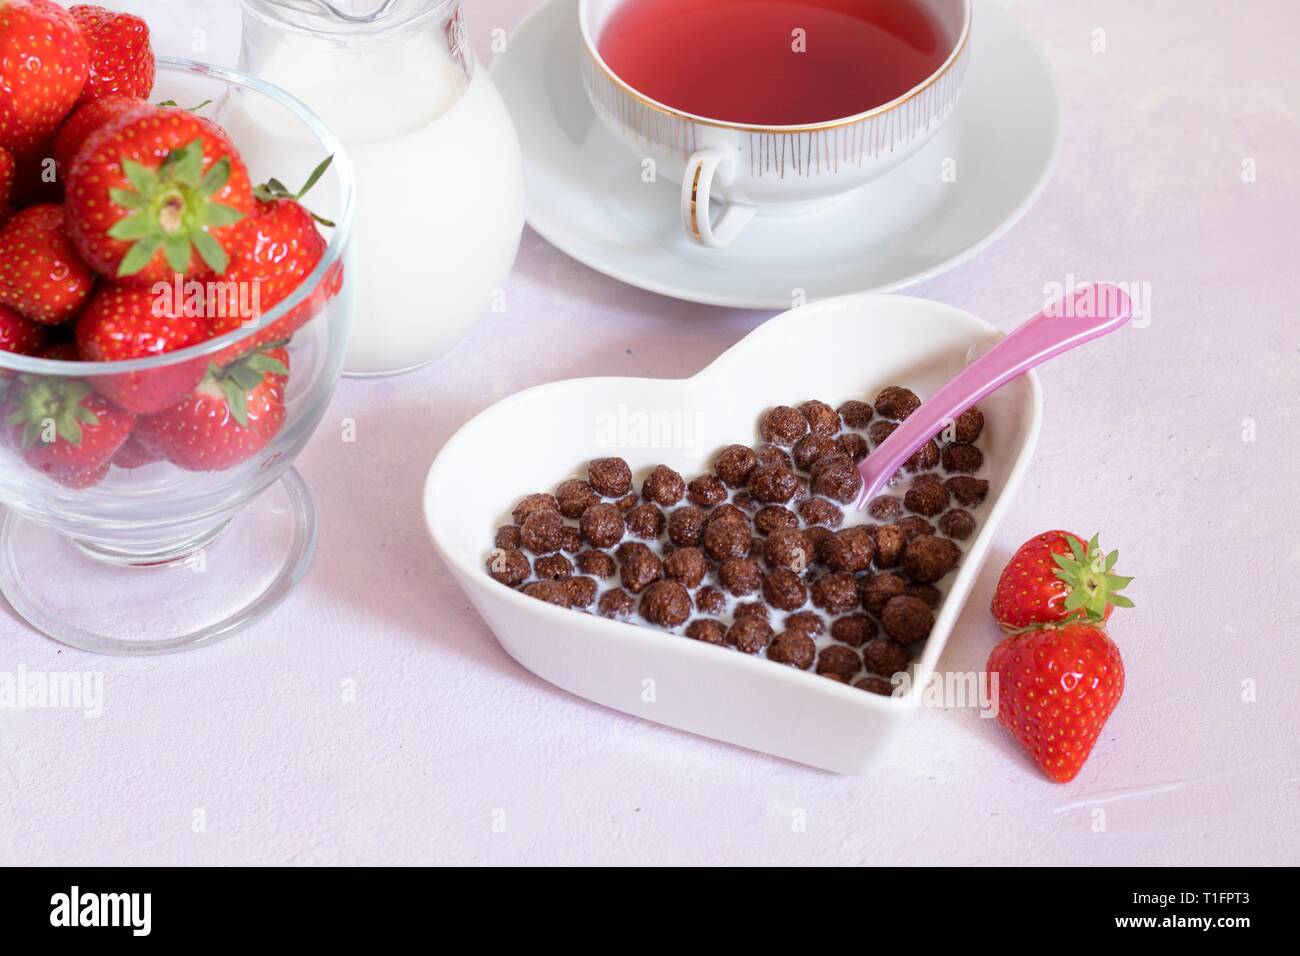 Breakfast for special little princess. Chocolate cereal balls, milk, strawberries and red fruit tea on pink backdrop Stock Photo